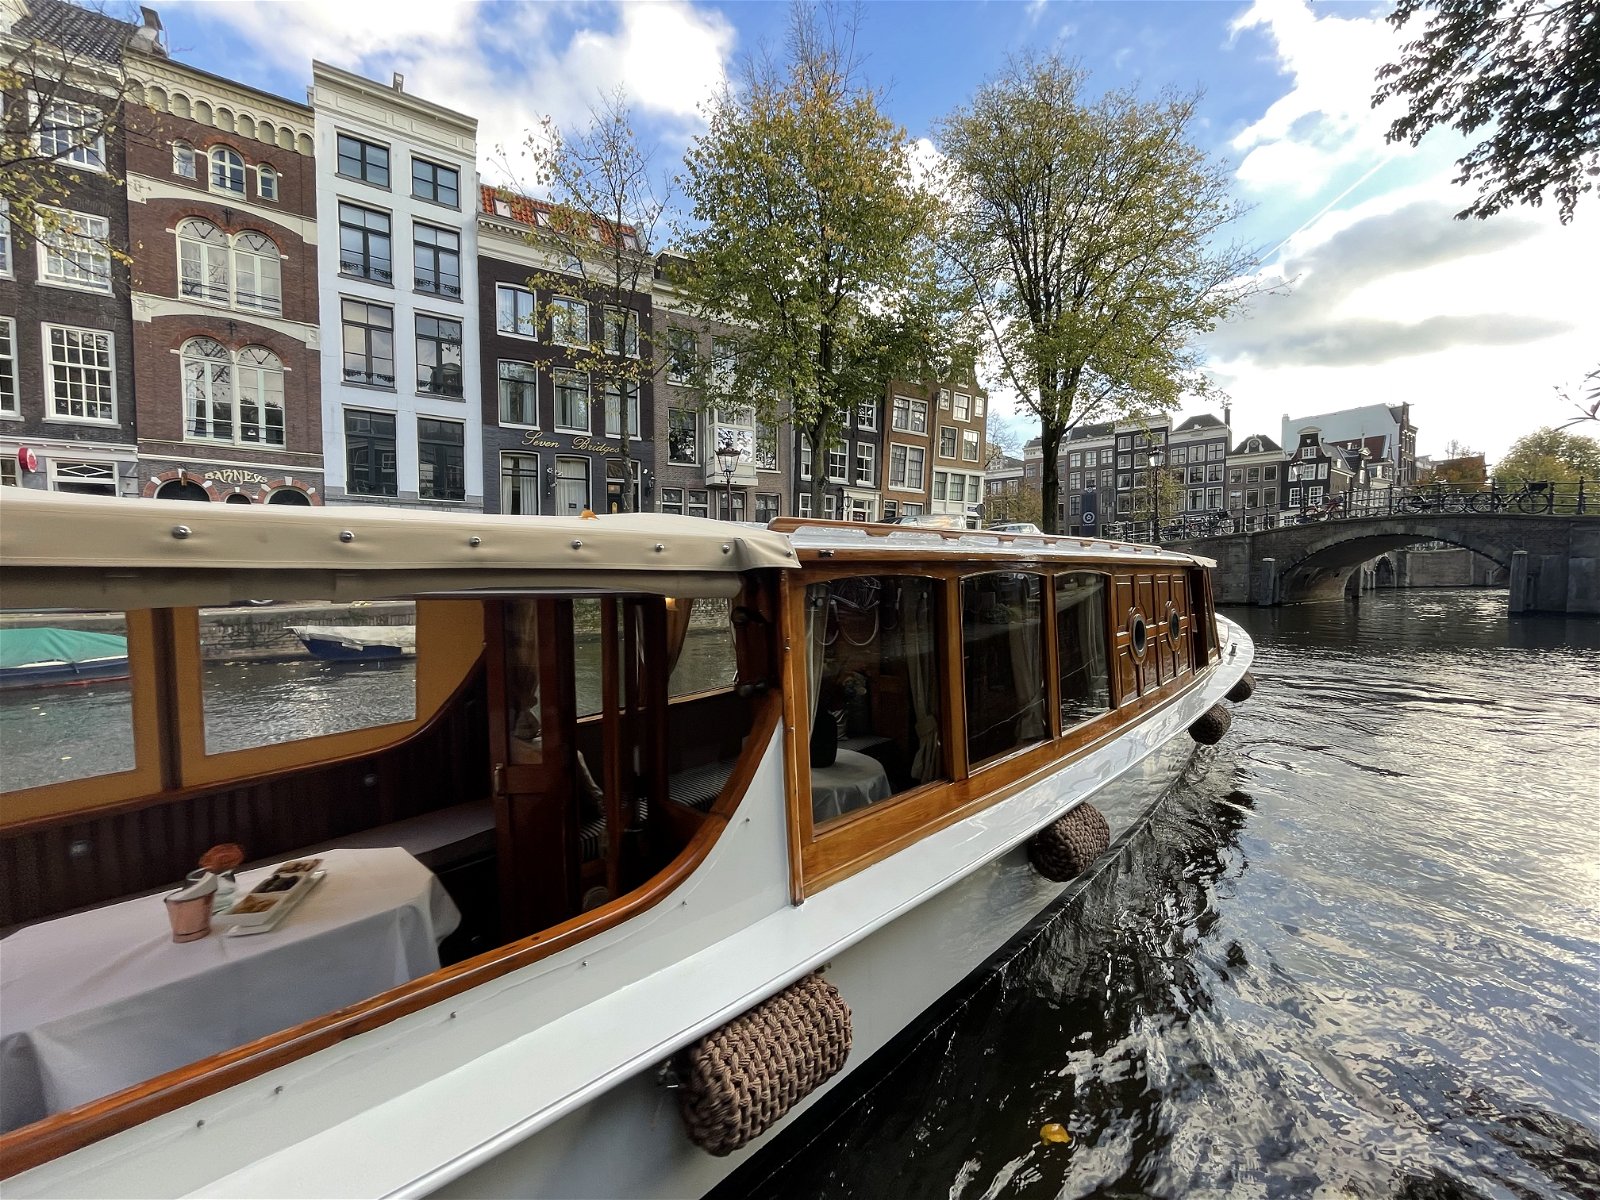 Canal boat Roerdomp